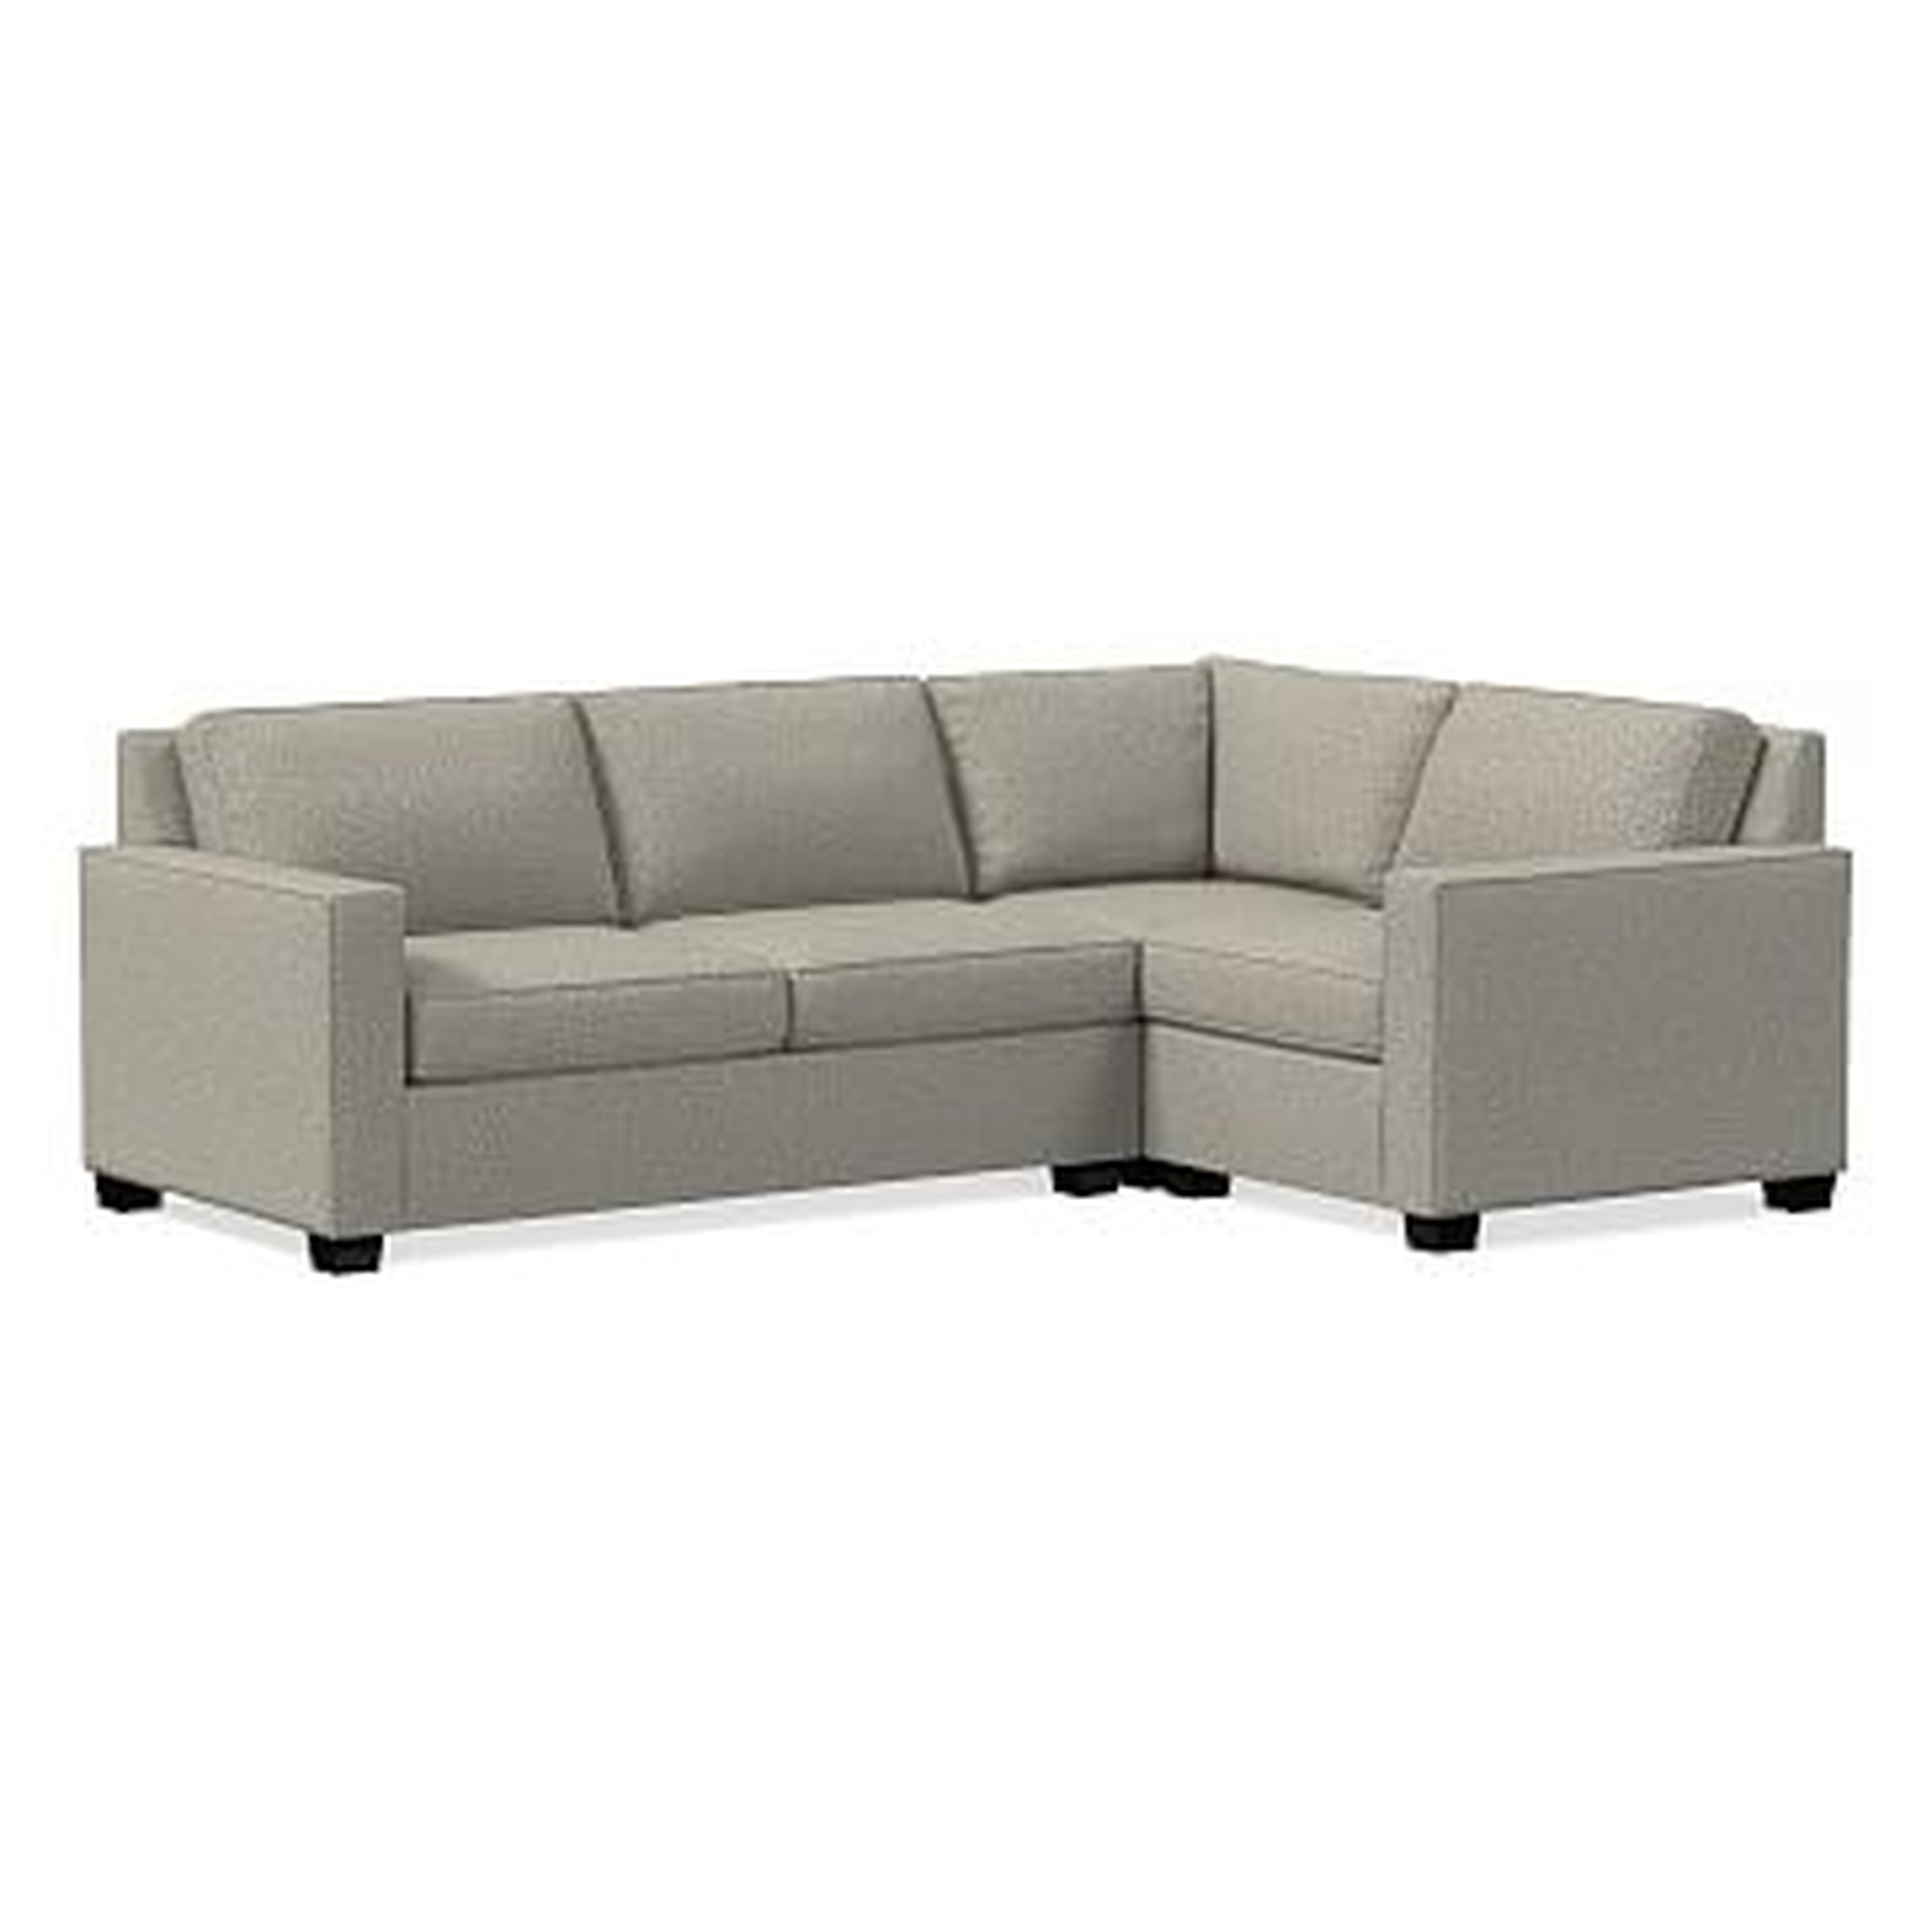 Henry Sectional Set 02: Corner, Left Arm Loveseat, Right Arm Chair, Twill, Gravel, Chocolate, Poly - West Elm